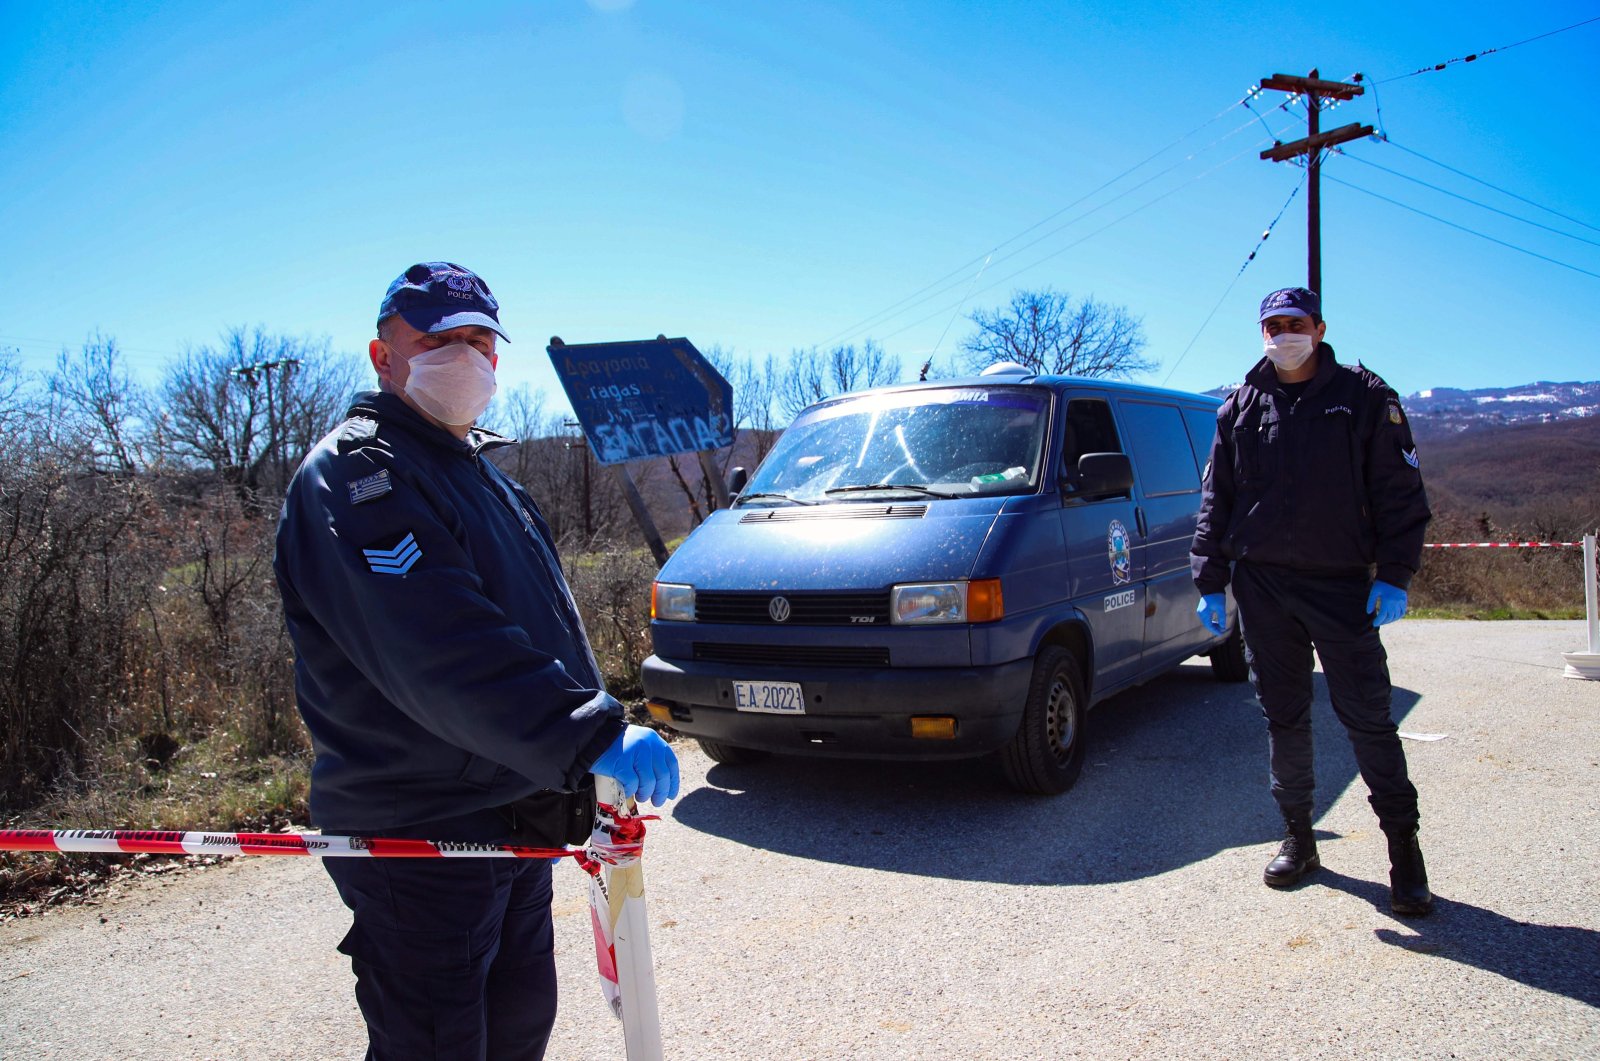 This file photo shows Greek policemen wearing face masks as a protective measure standing guard at a checkpoint on the road to the village of Dragasia near Kozani on Tuesday, March 17, 2020. (AFP Photo)